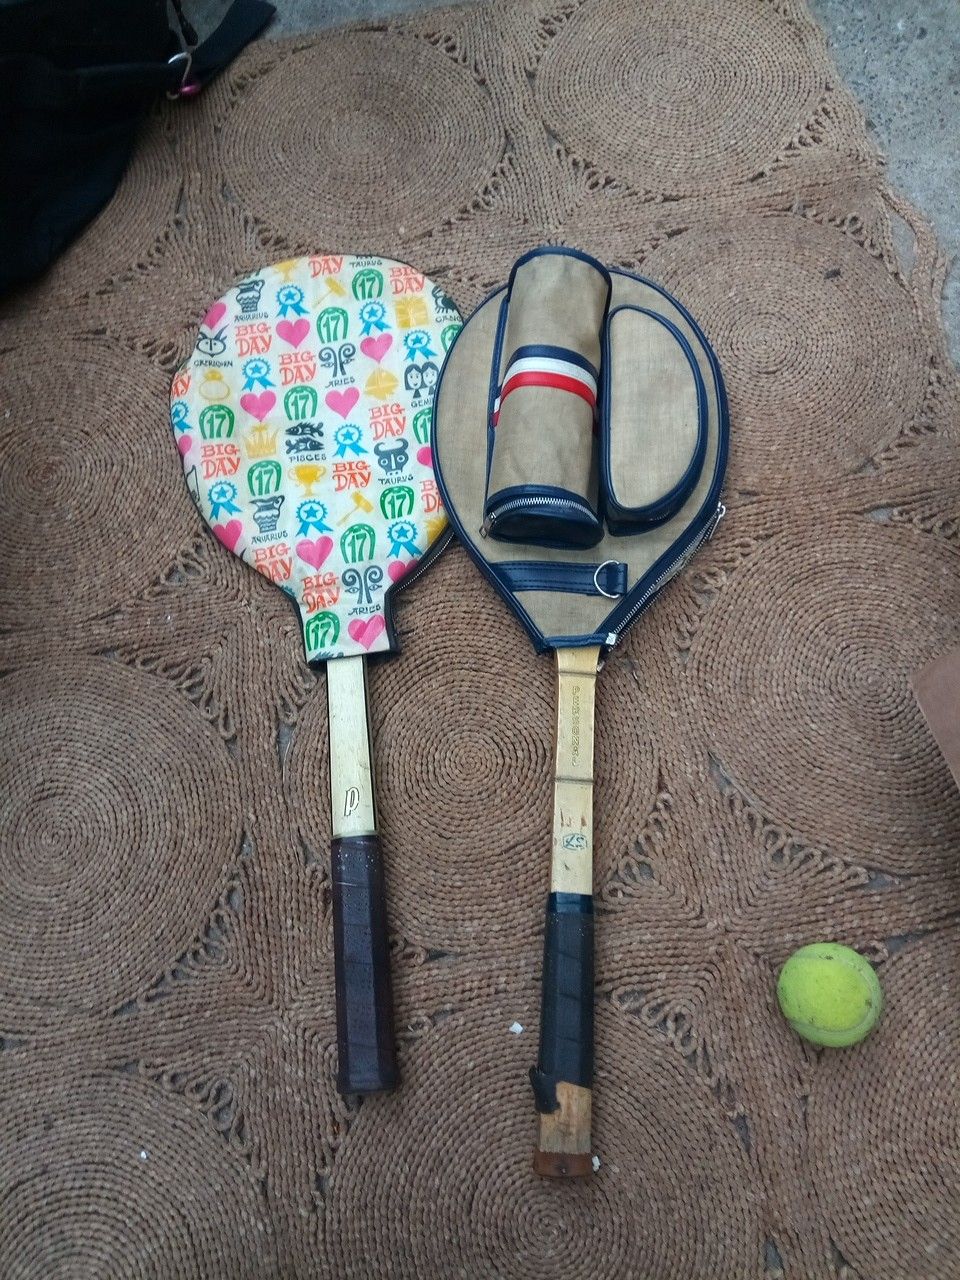 Vintage tennis rackets with cases